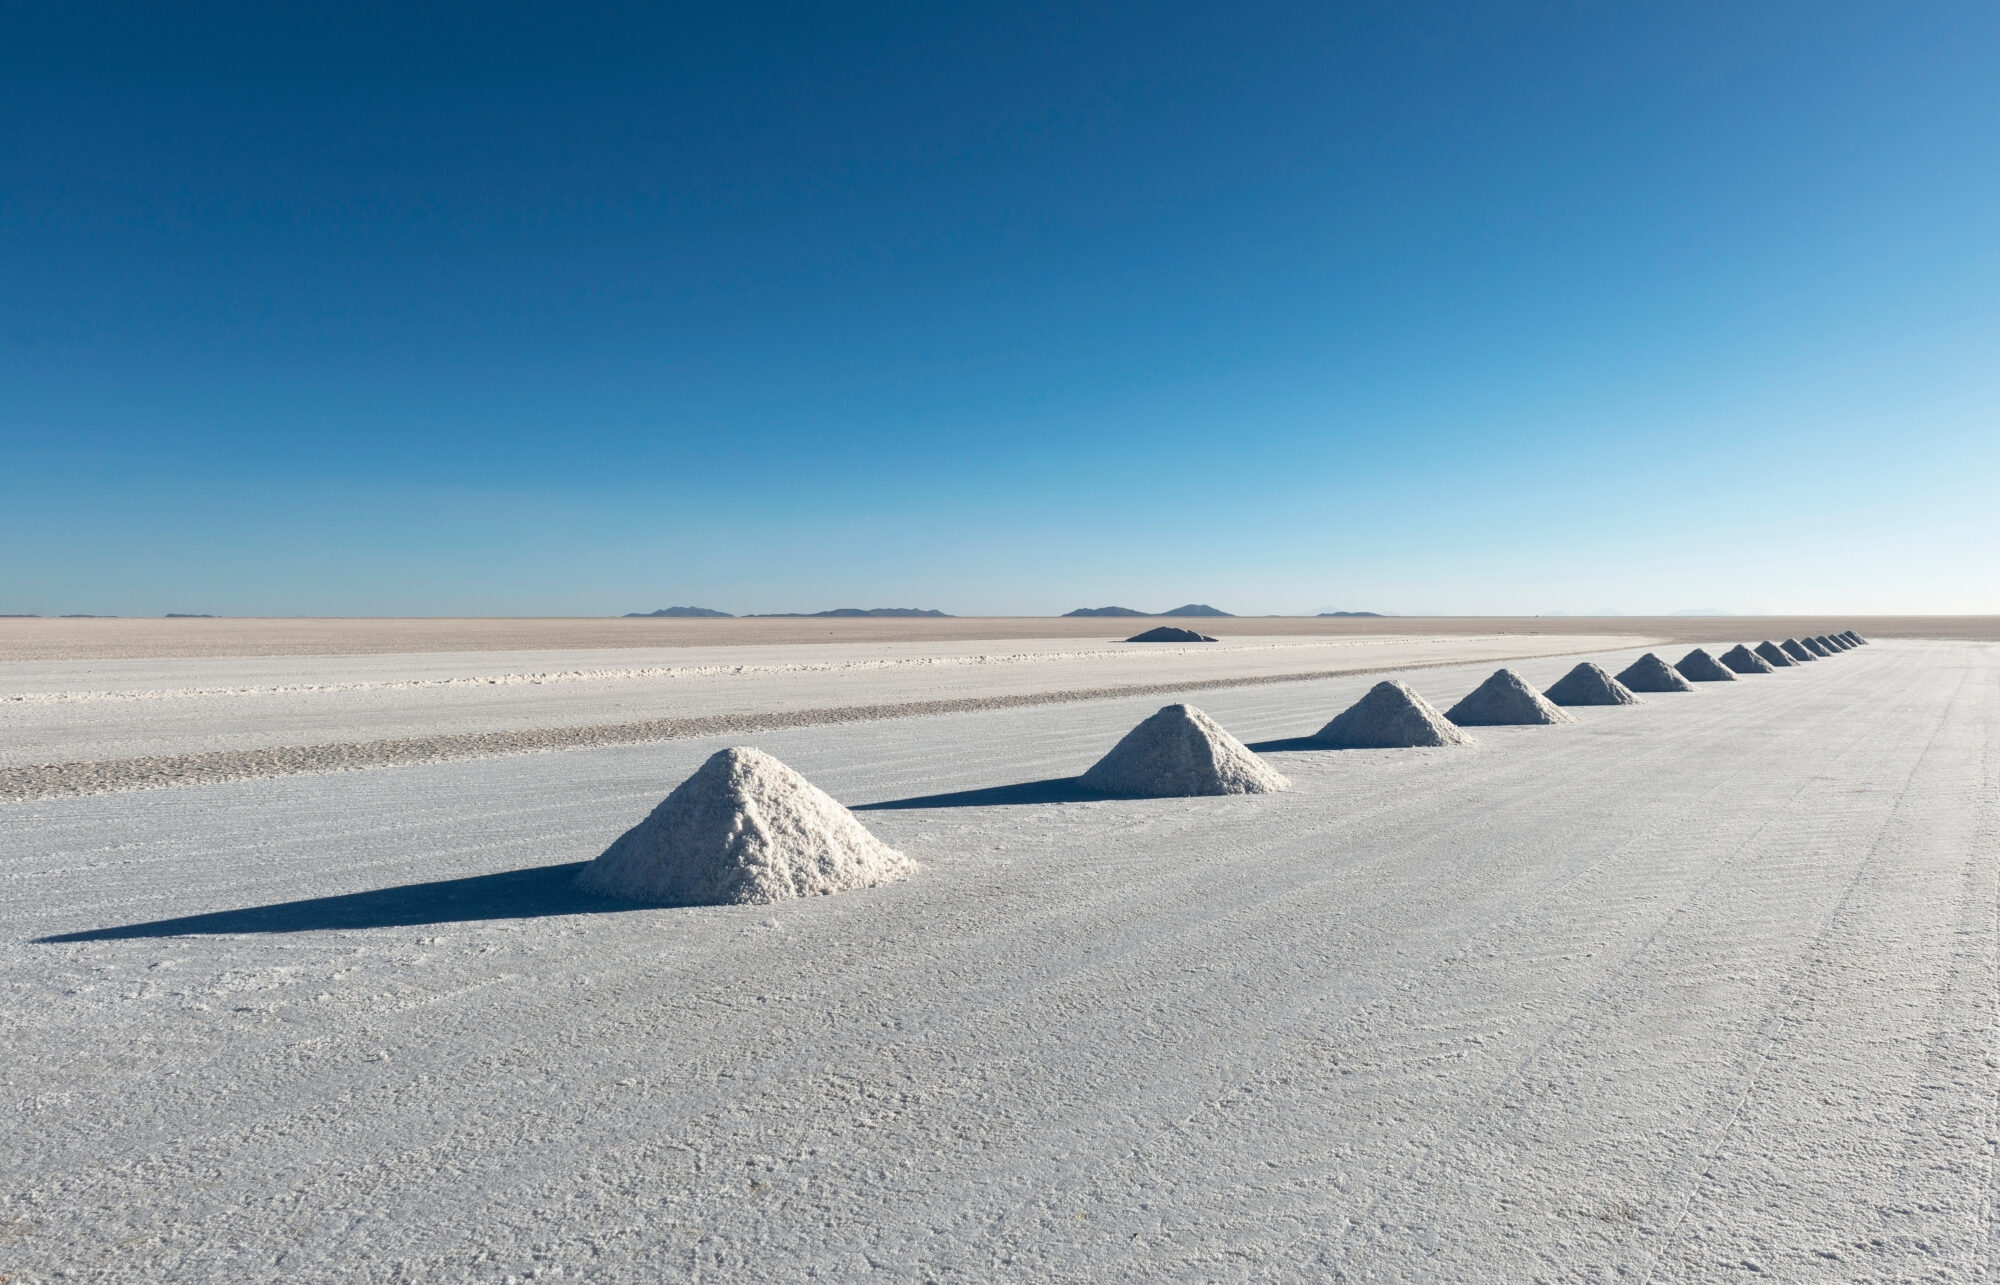 <p>The iconic Uyuni salt flats in Bolivia, where lithium production is expected to ramp up, given its role as one of the key minerals for the global energy transition (Image: Alamy)</p>